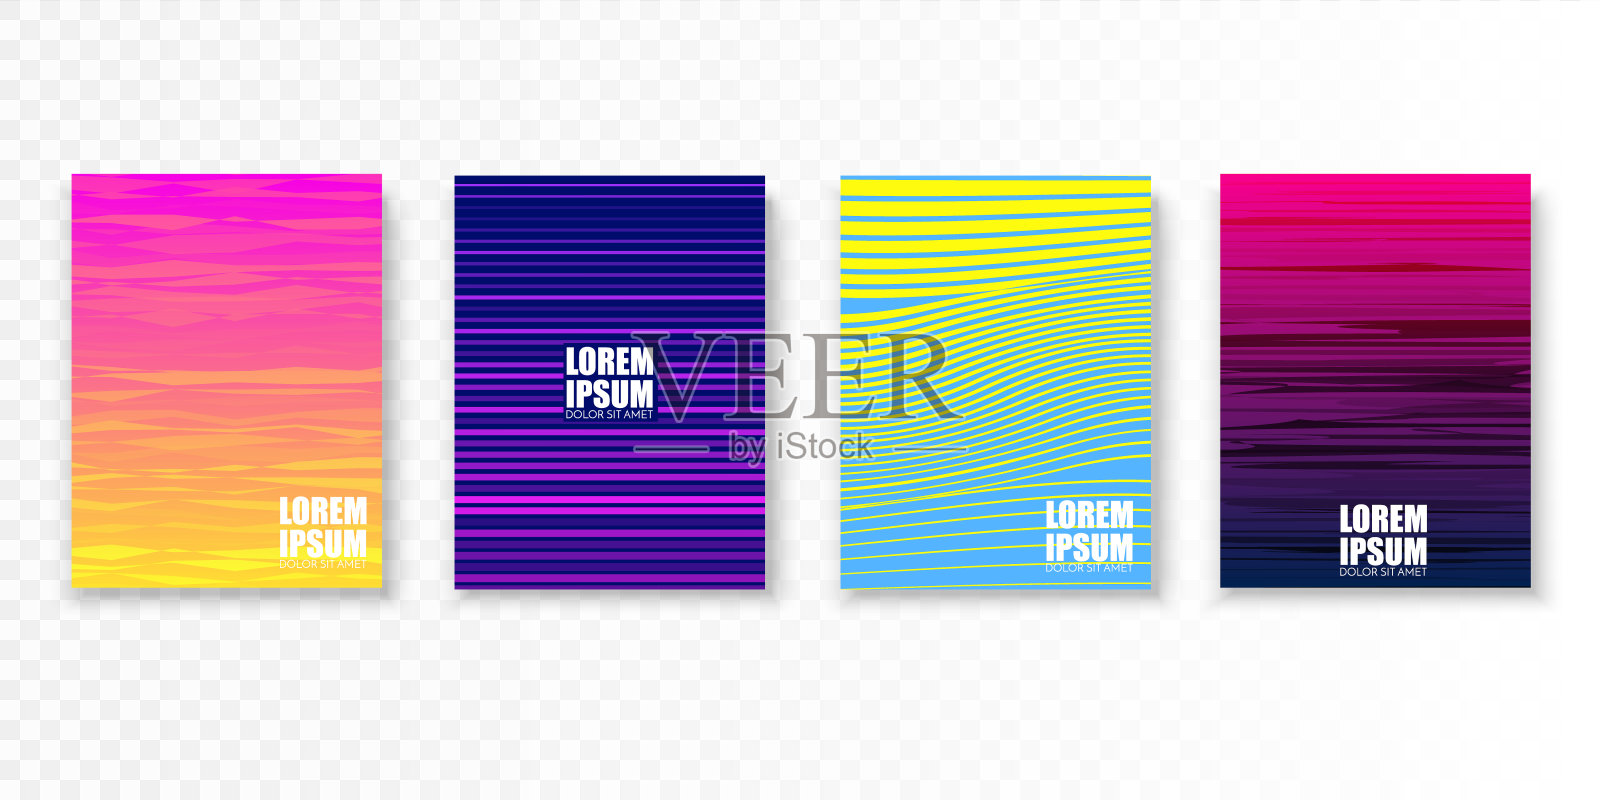 Colorful covers design in minimal style. Bright vector patterns插画图片素材